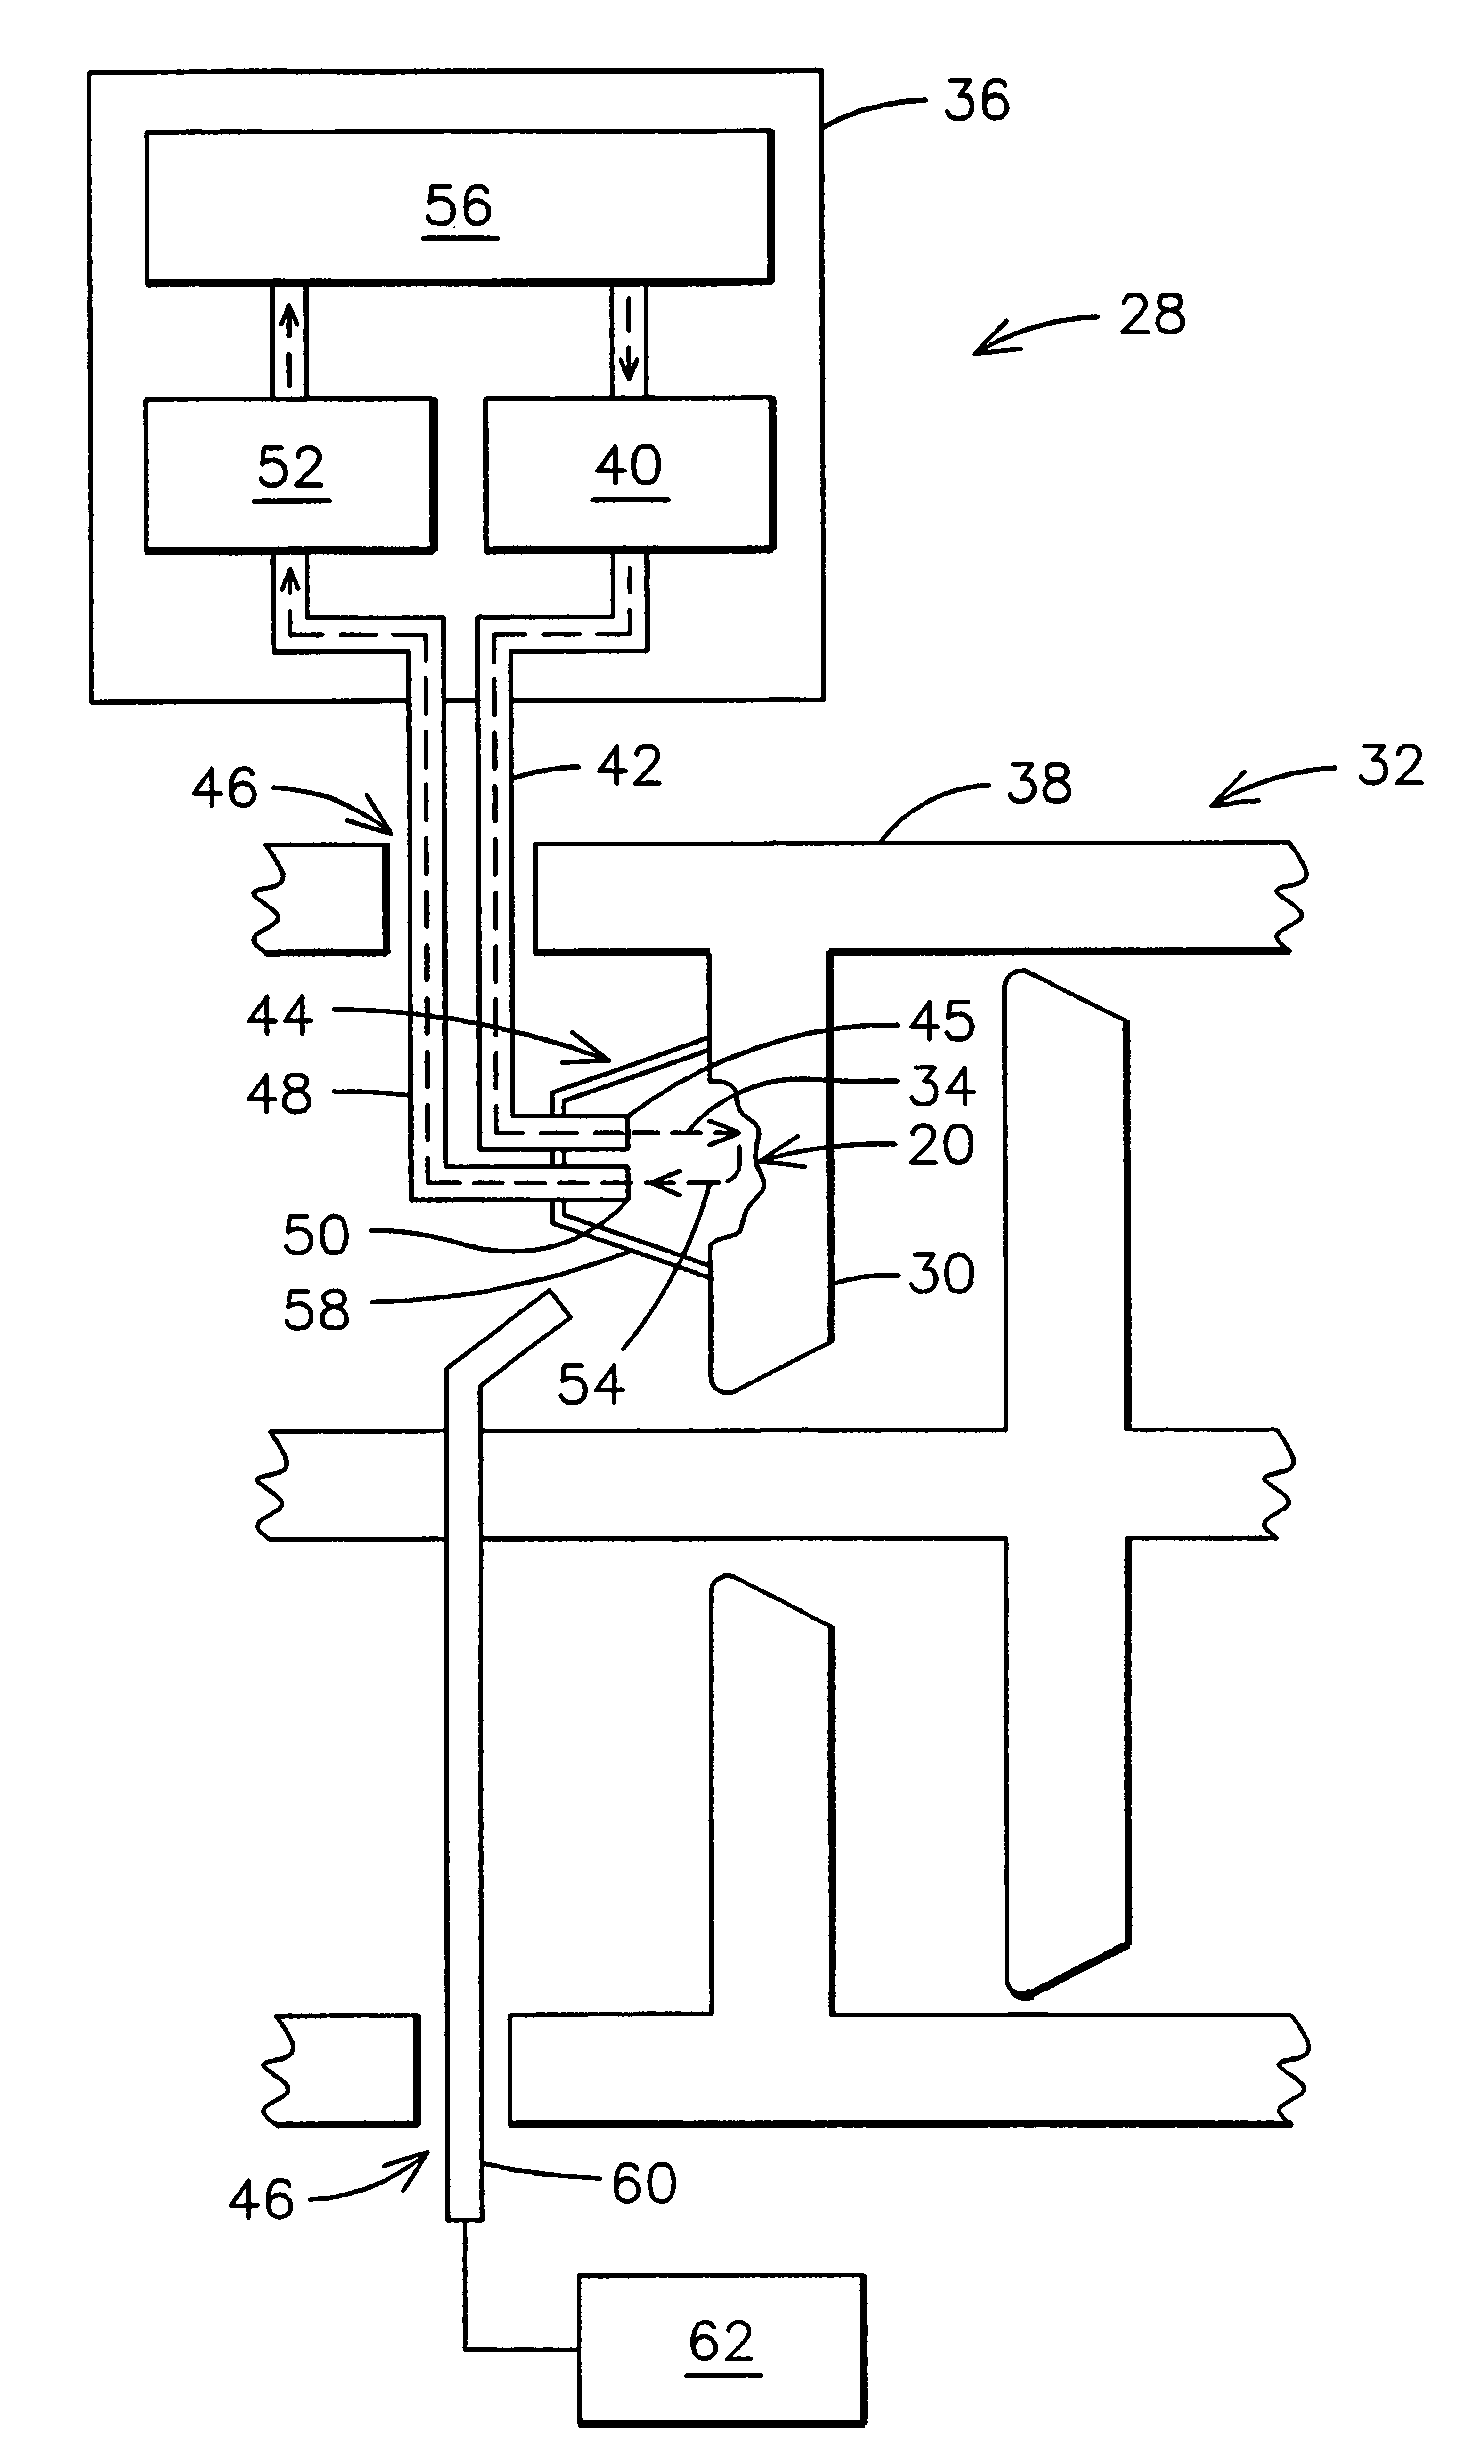 In-frame repairing system of gas turbine components